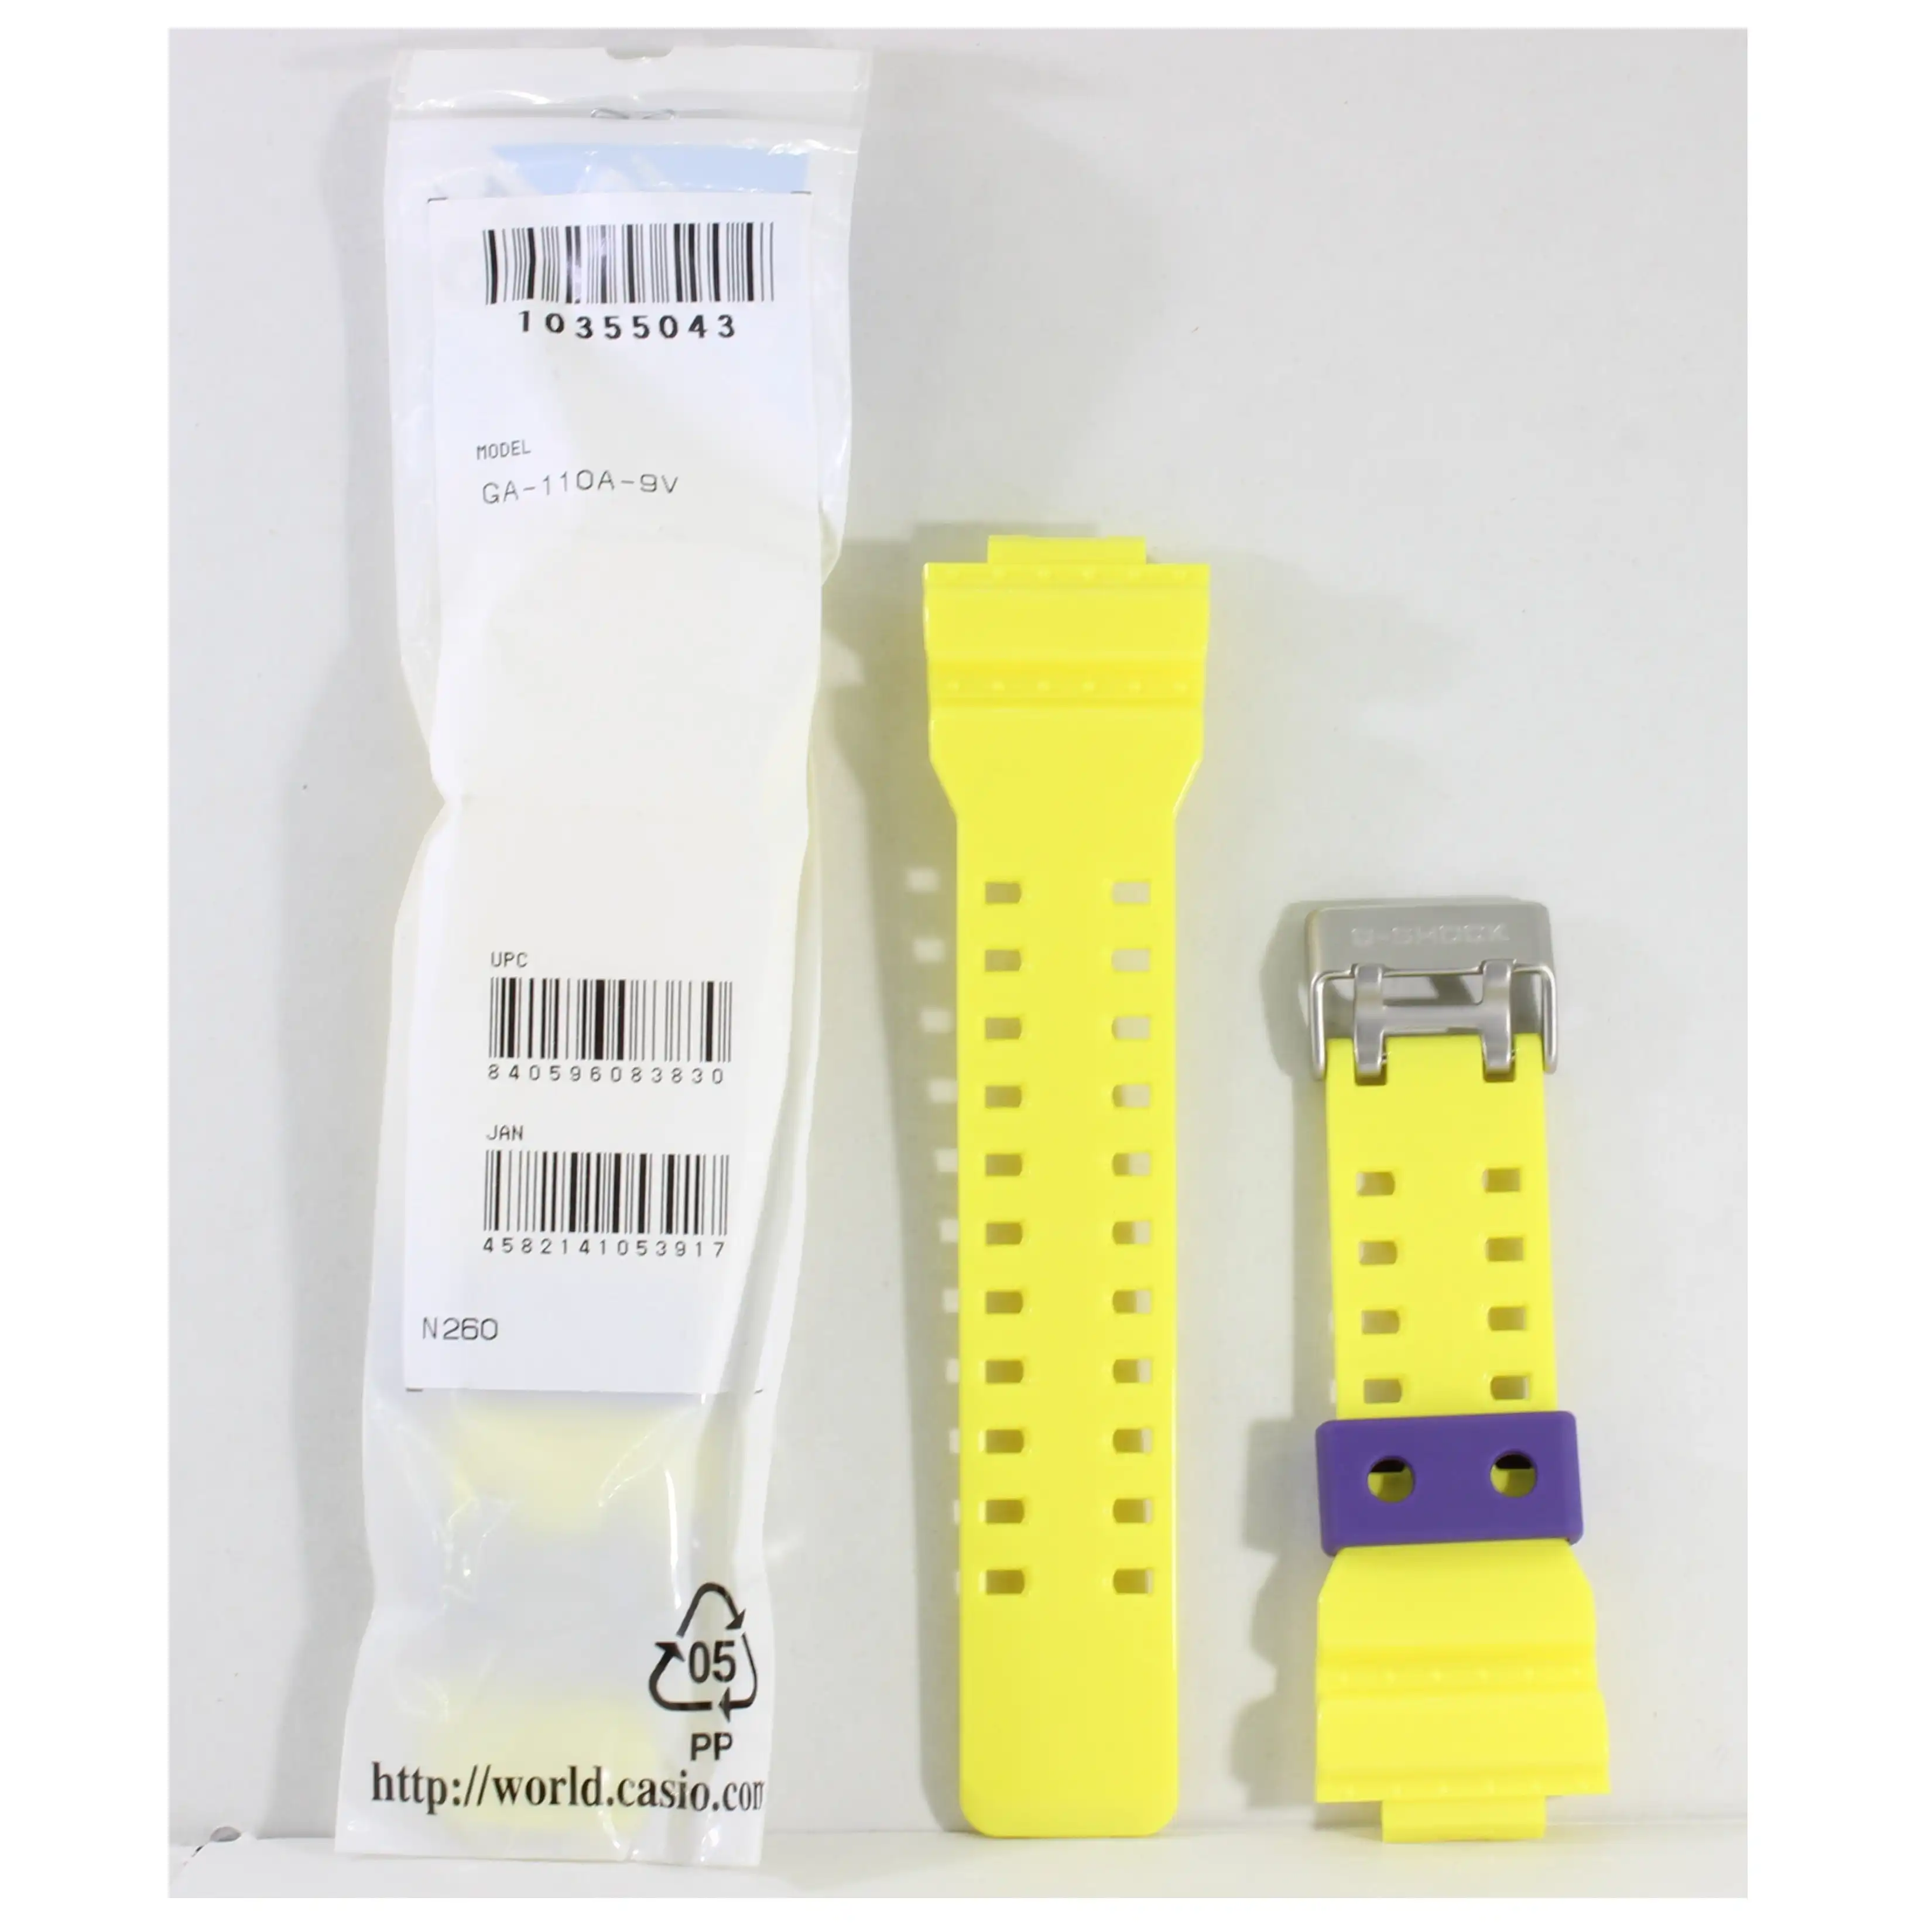 Casio G-Shock Shiny Yellow Genuine Replacement Strap 10355043 to suit GA110A-9